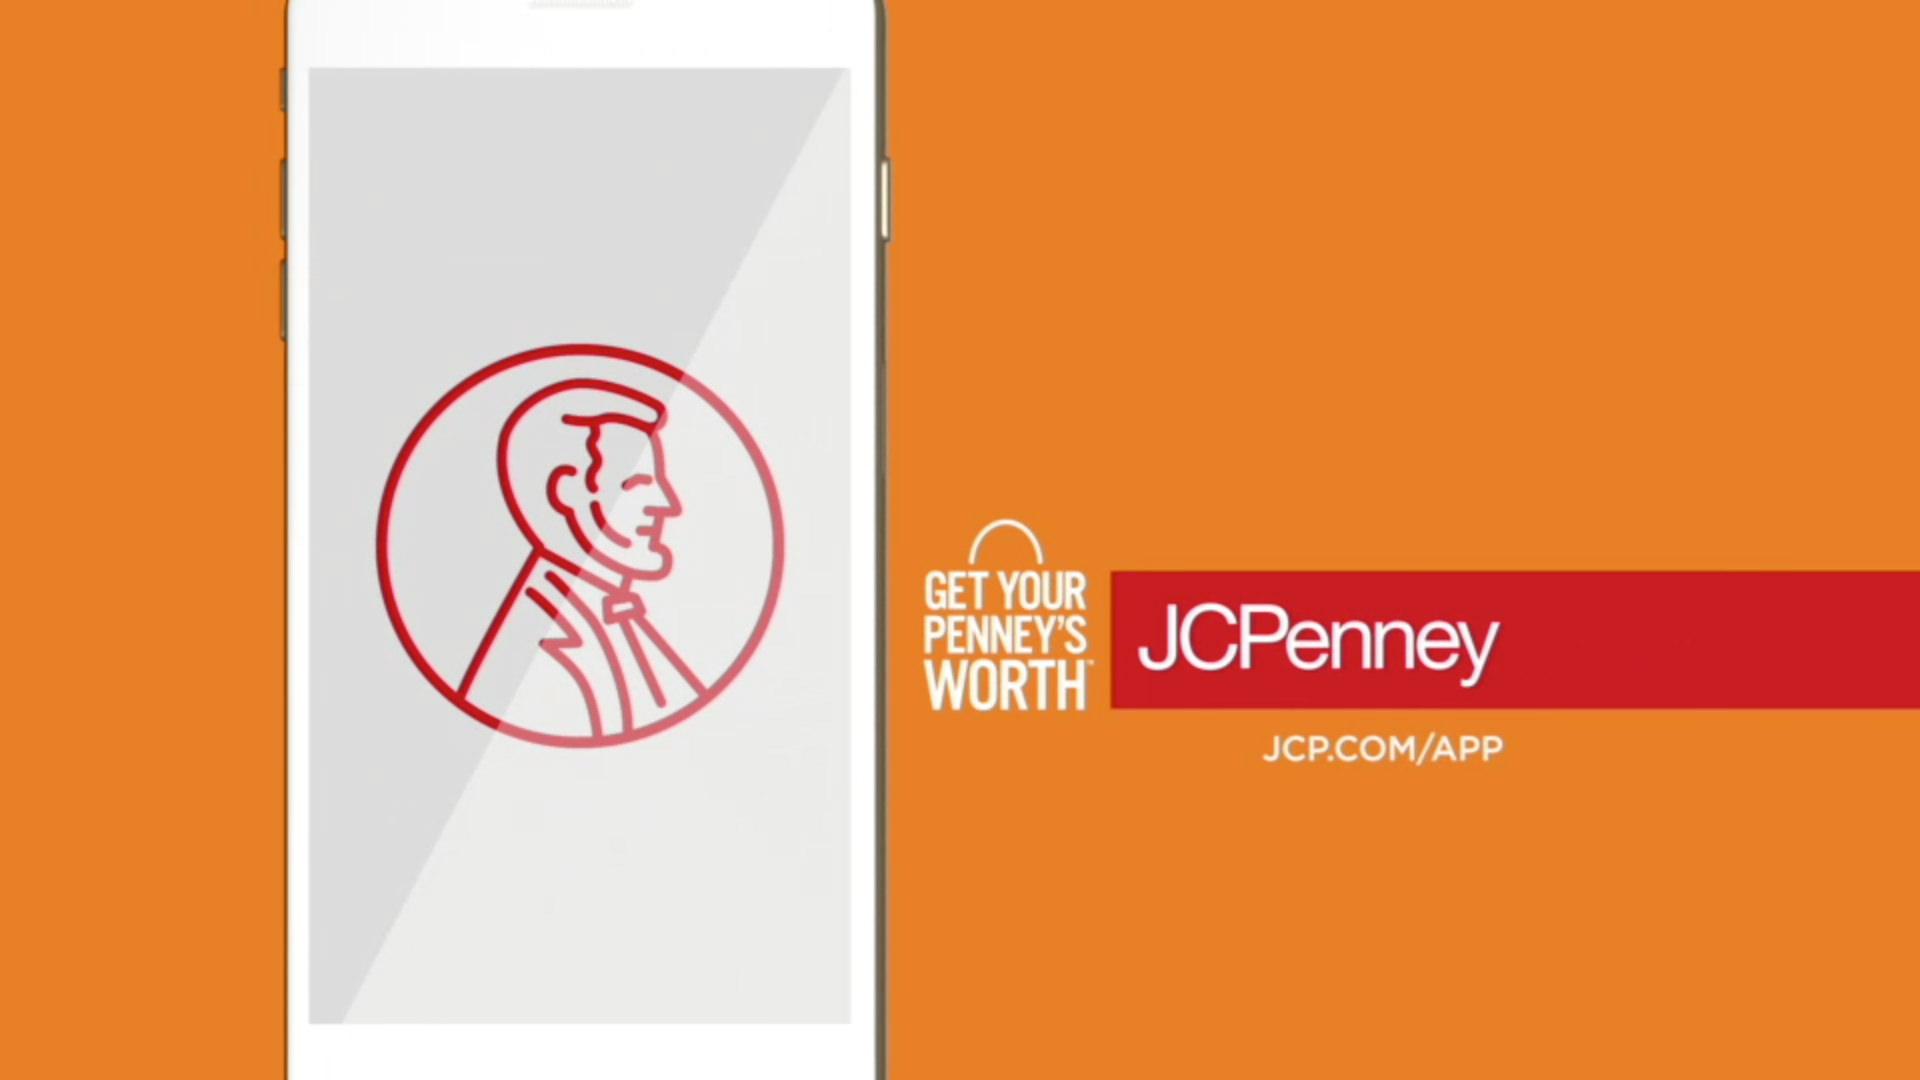 JCPenney 2017 Logo - THE JCPENNEY MOBILE APP: New Features at Your Fingertips